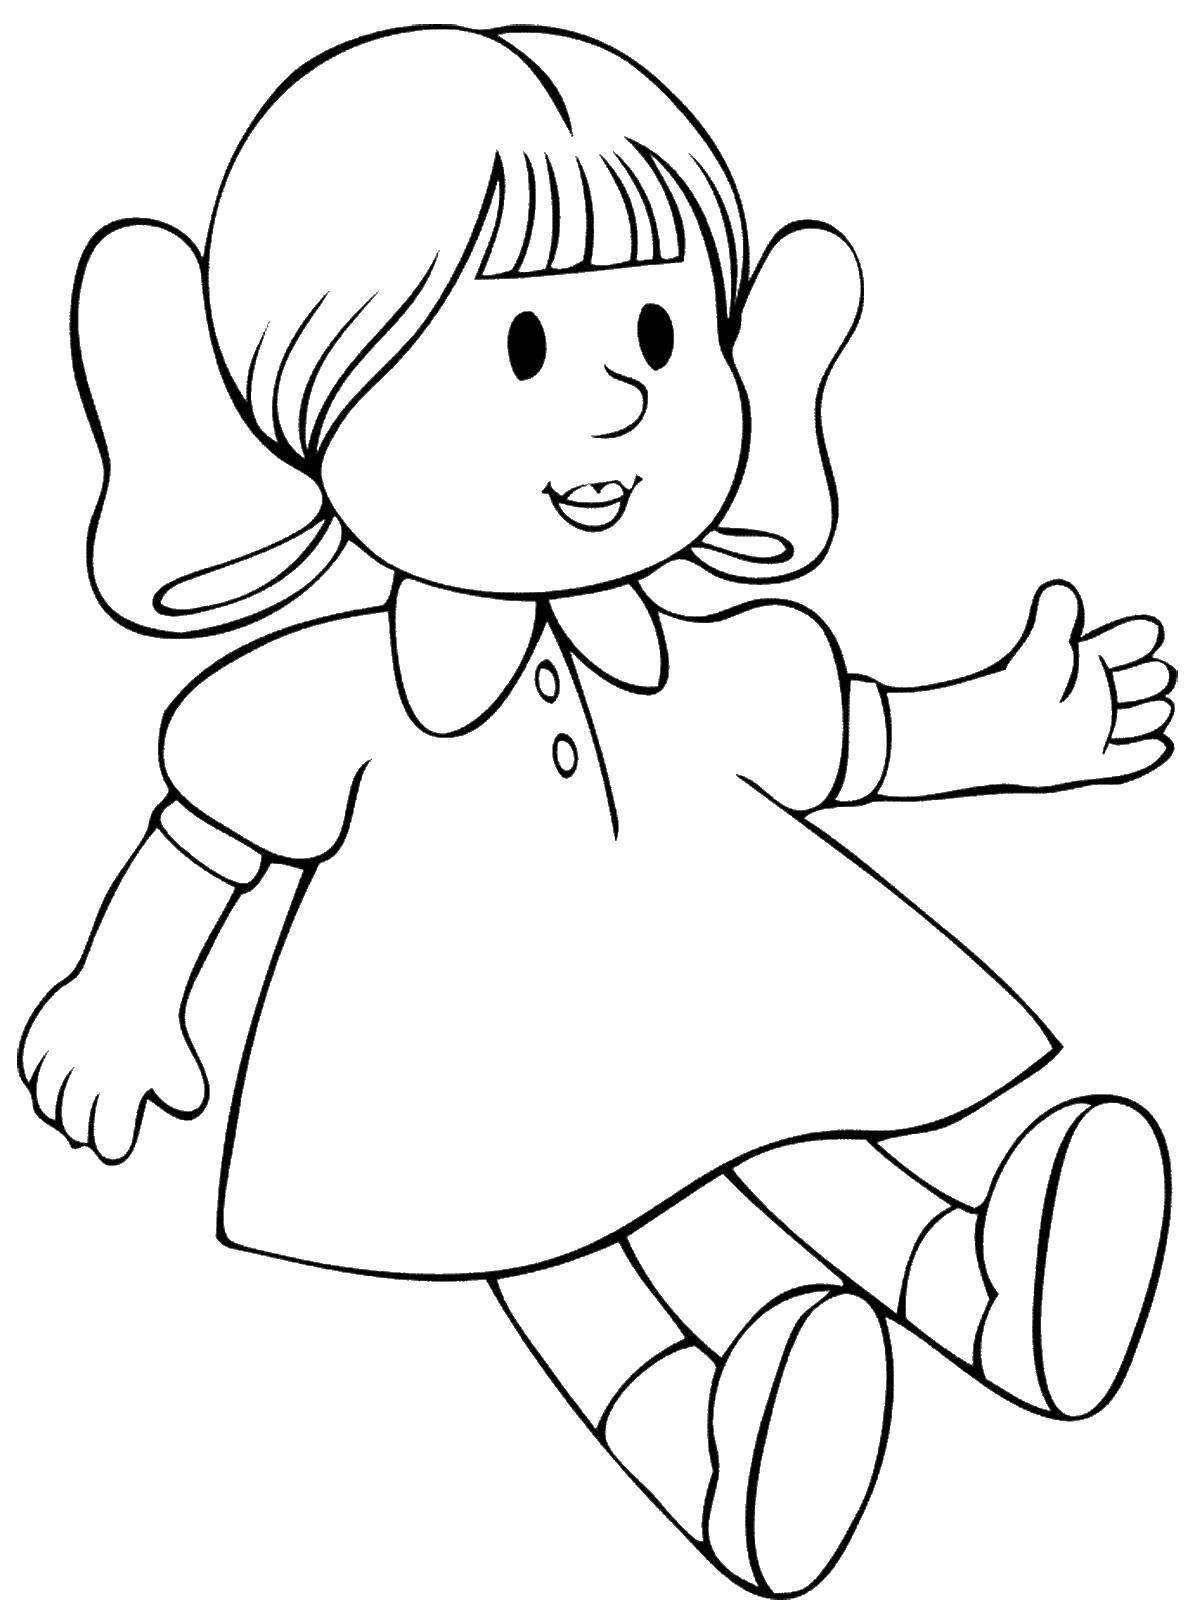 Coloring Doll. Category Coloring pages for kids. Tags:  Doll, fashionista, fashion.